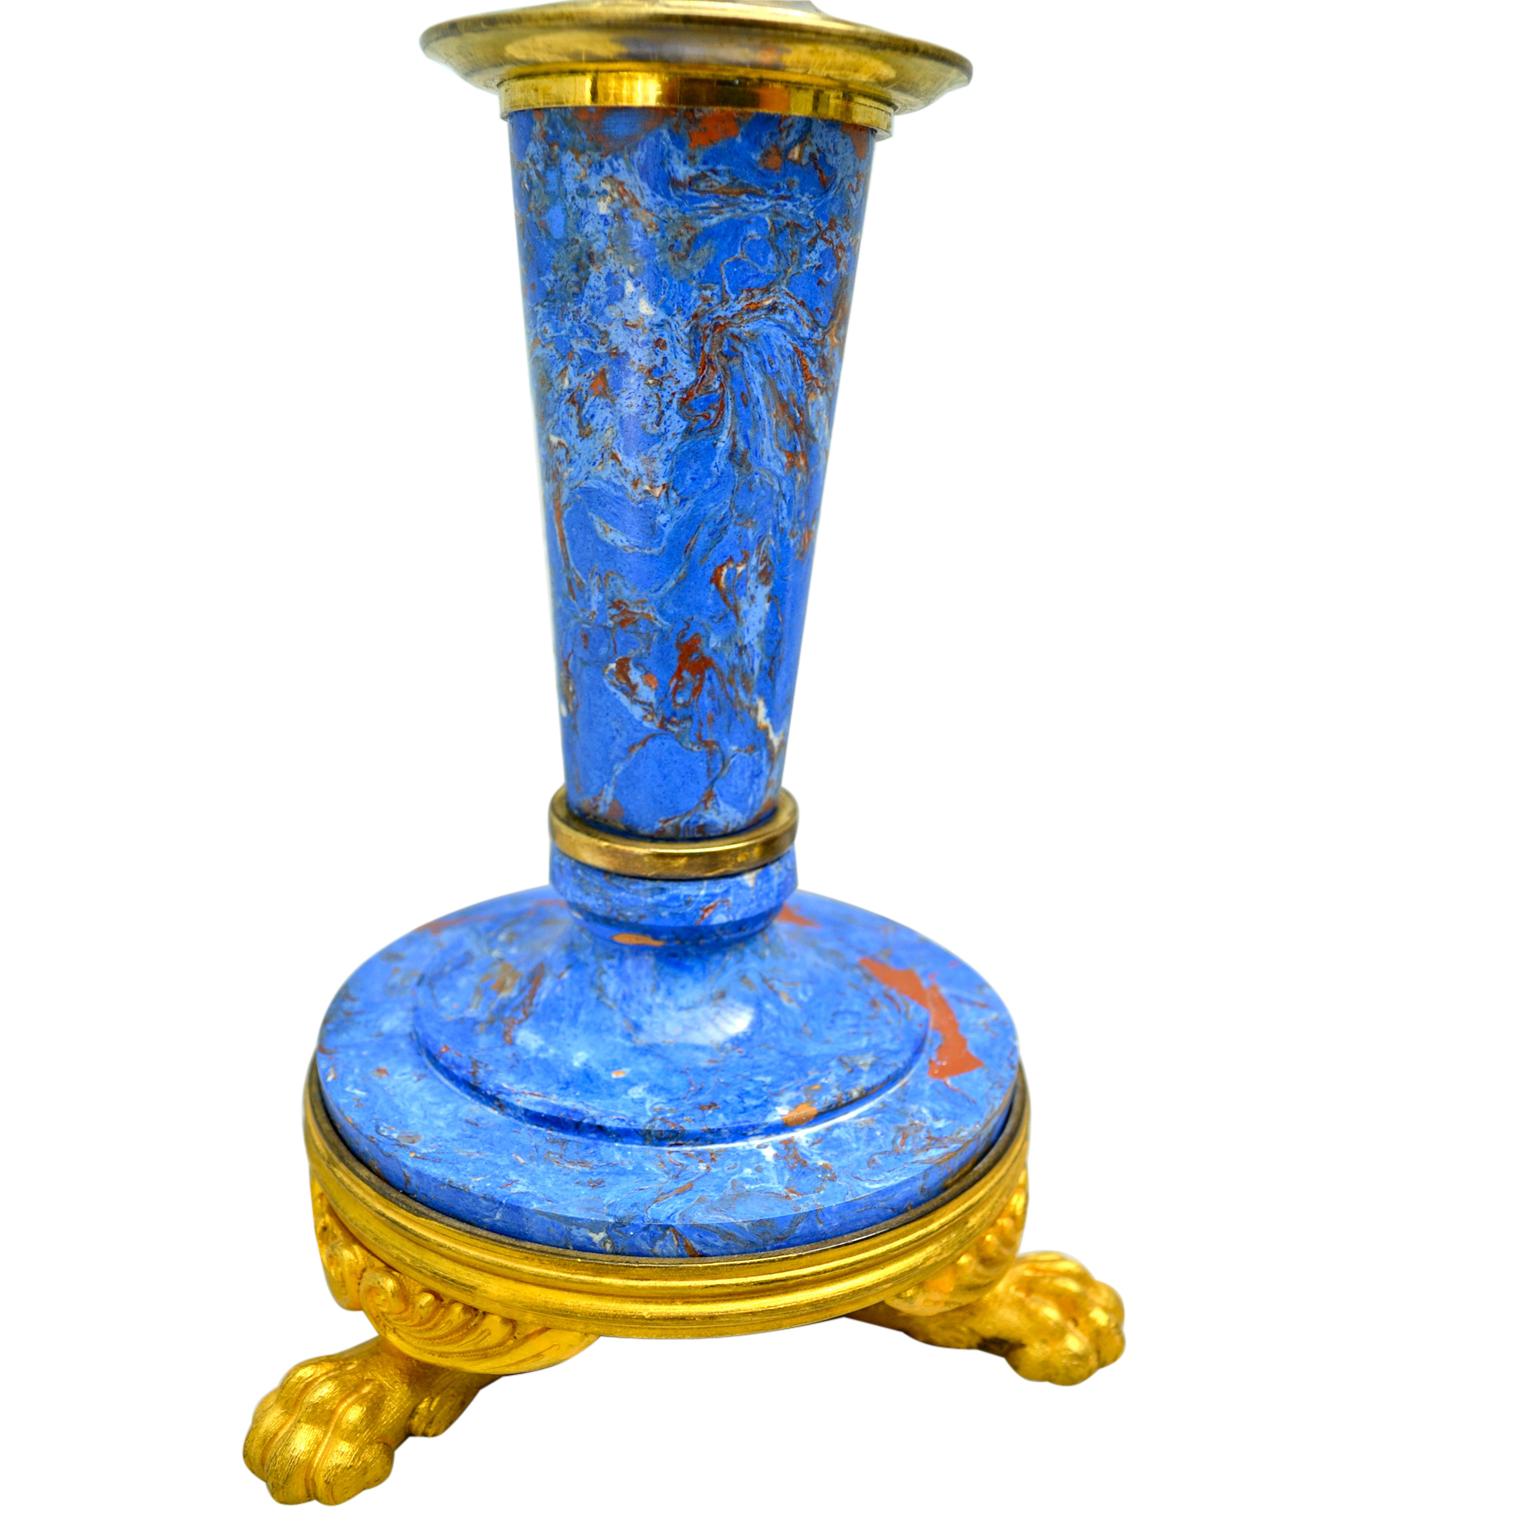 A pair of English candlesticks in gilded bronze and imitation blue lapis lazuli scagliola; the circular gilt bronze bases sit on four lion’s paw feet; the stem is also of scagliola which supports two detachable candle arms and central finial all in